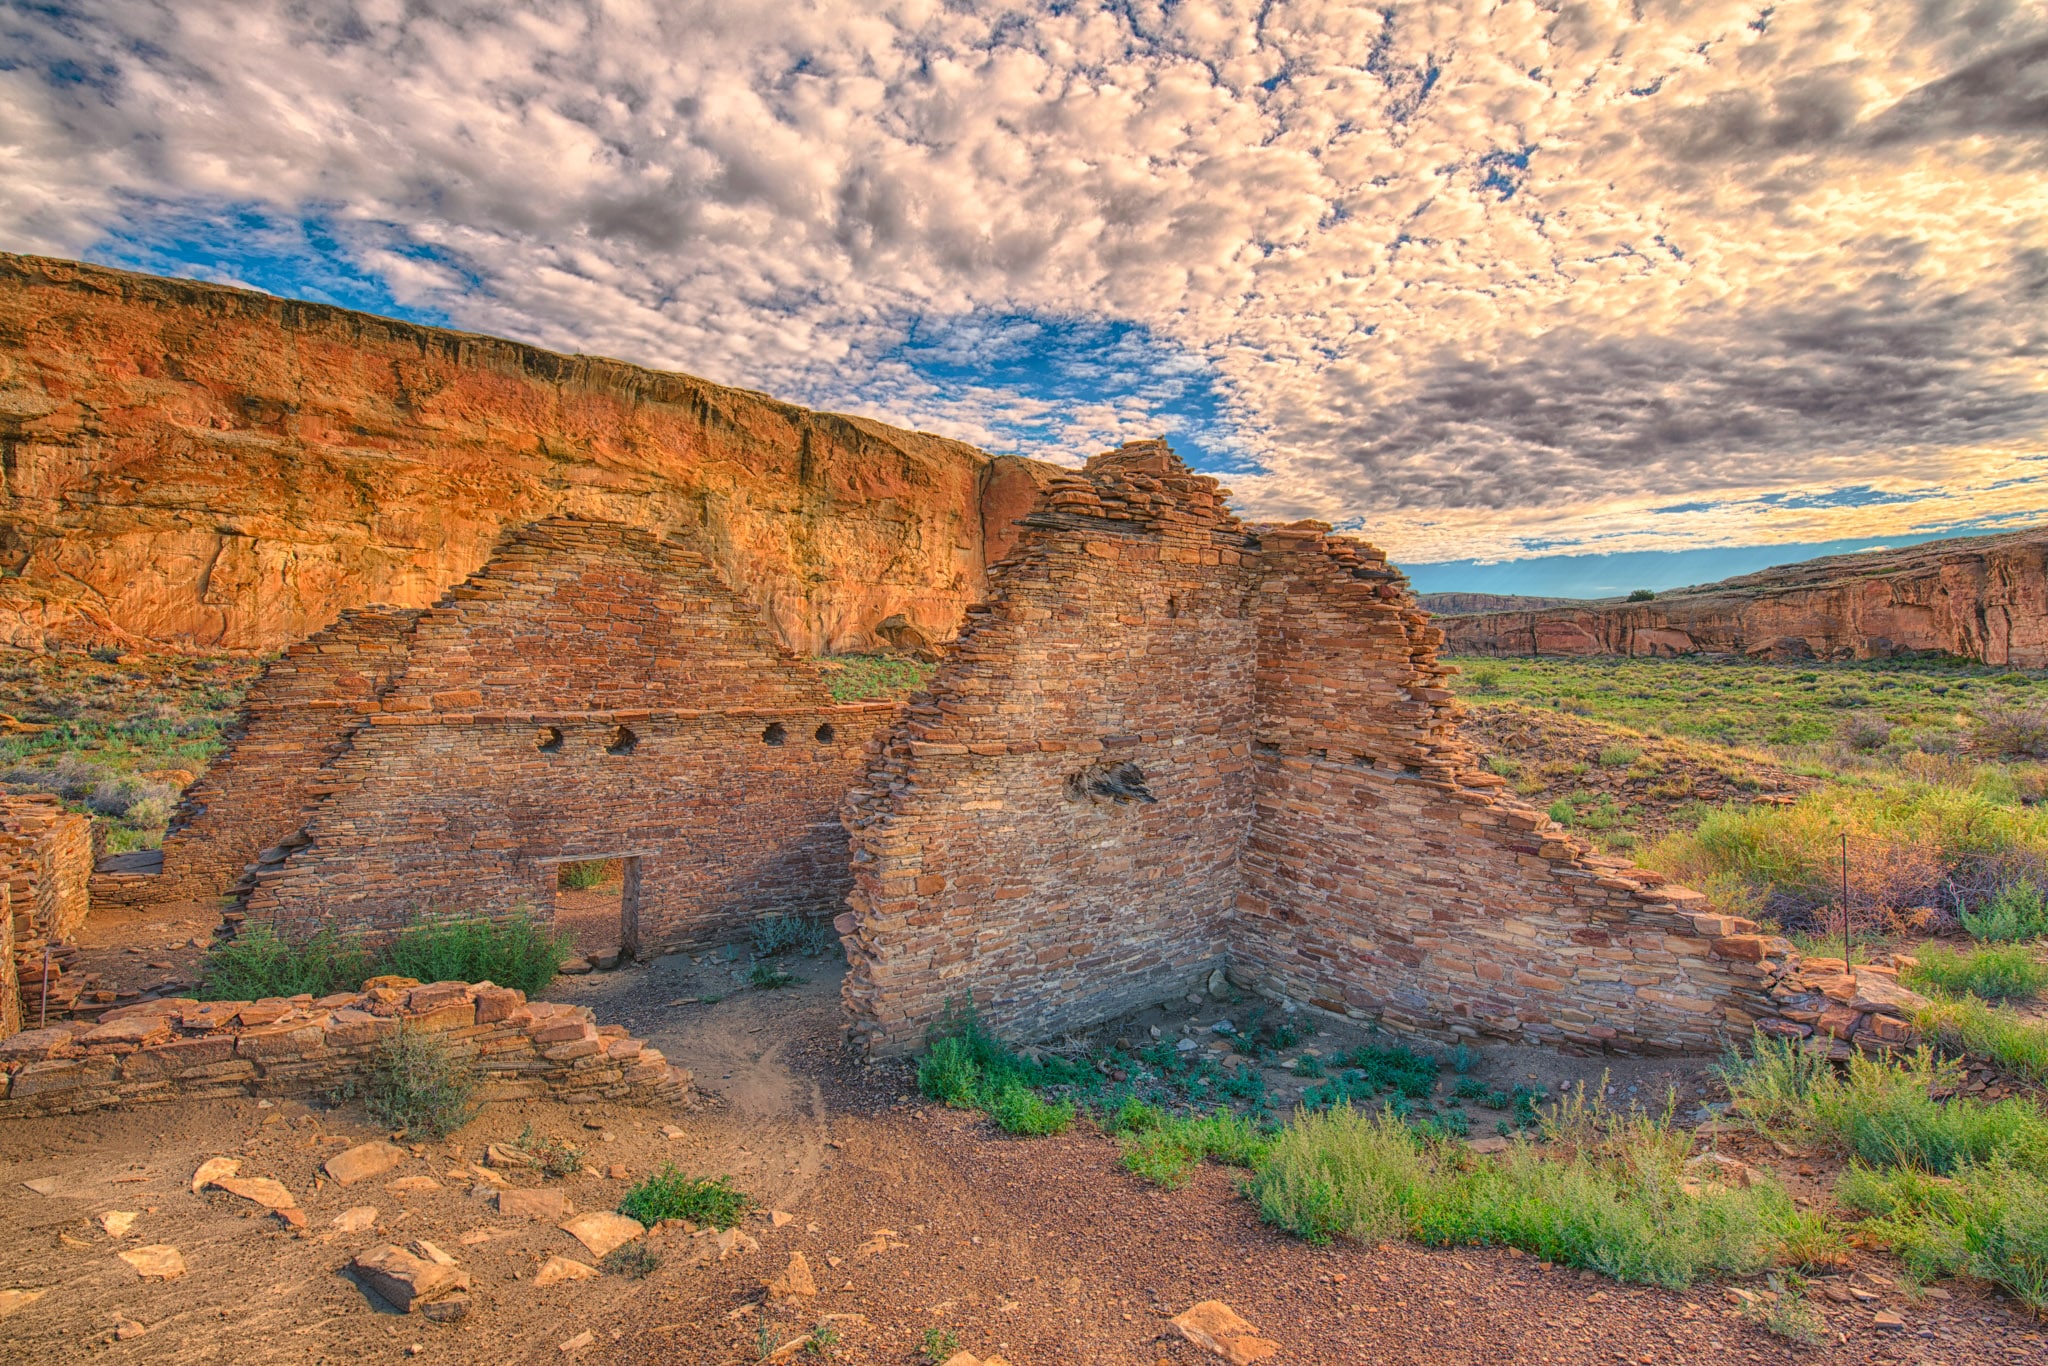 A view of Chetro Ketl ruins, looking east down Chaco Wash in Chaco Canyon, New Mexico.